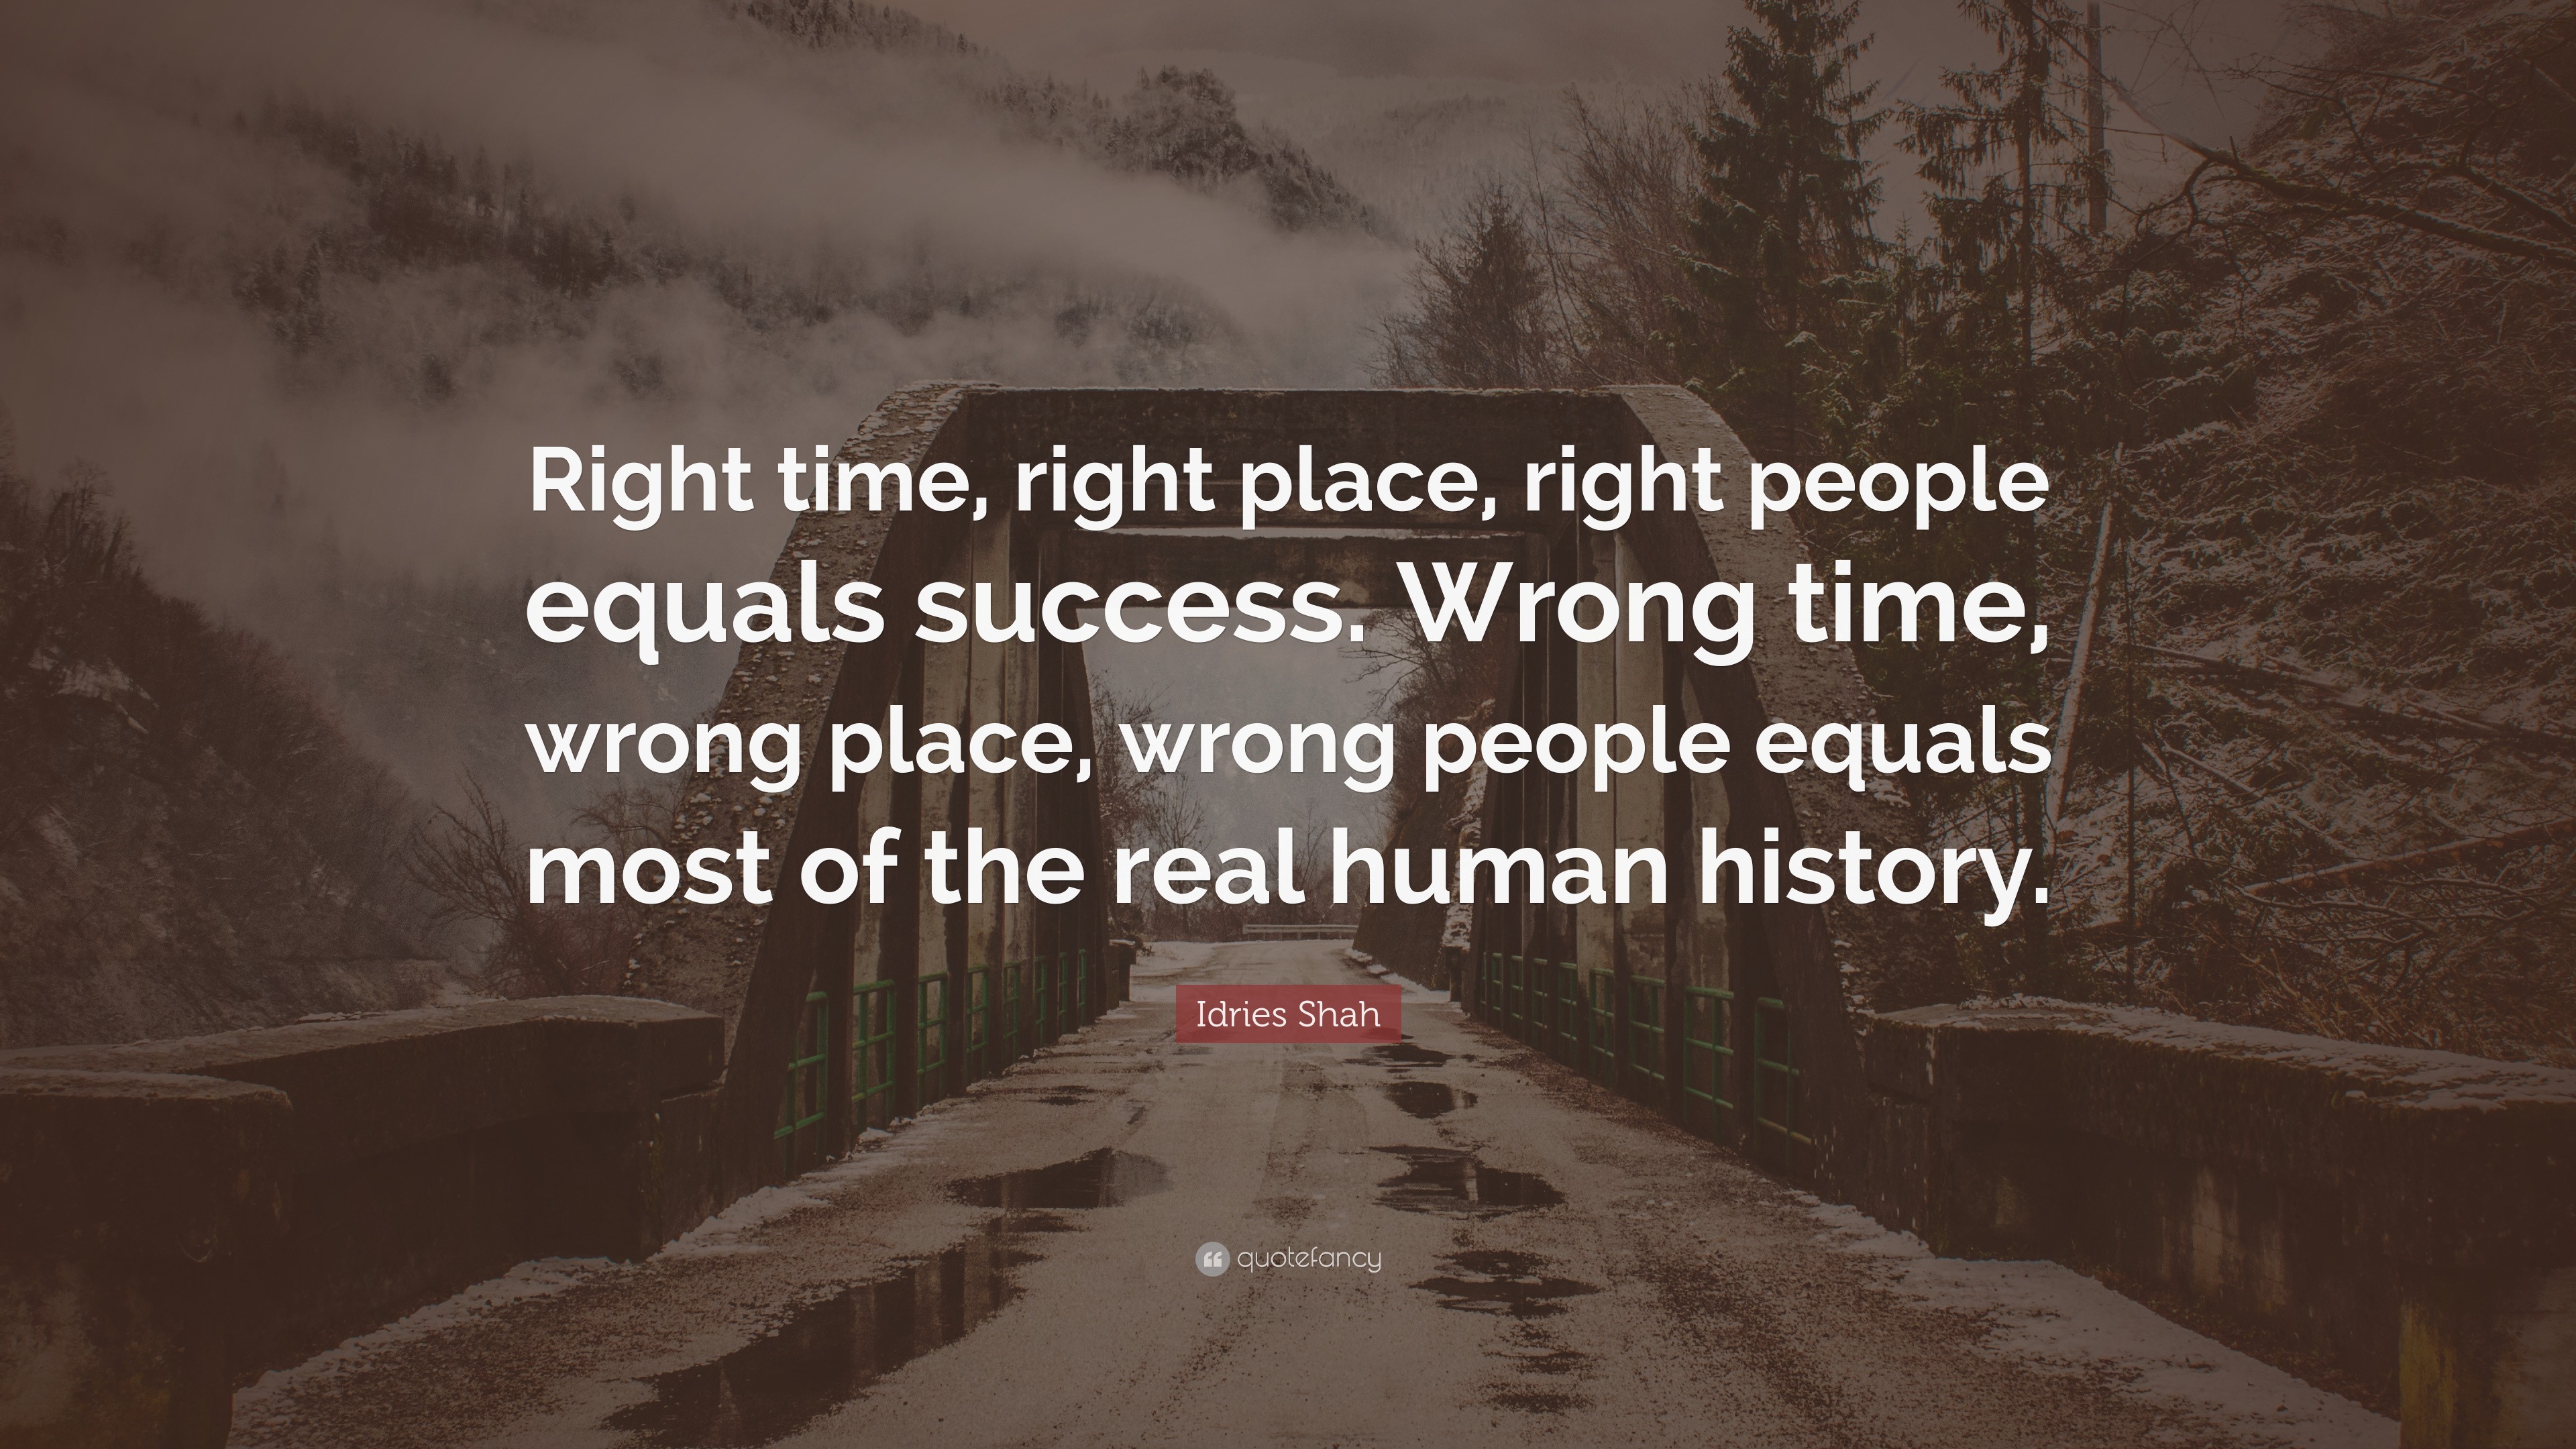 Idries Shah Quote “right Time Right Place Right People Equals Success Wrong Time Wrong